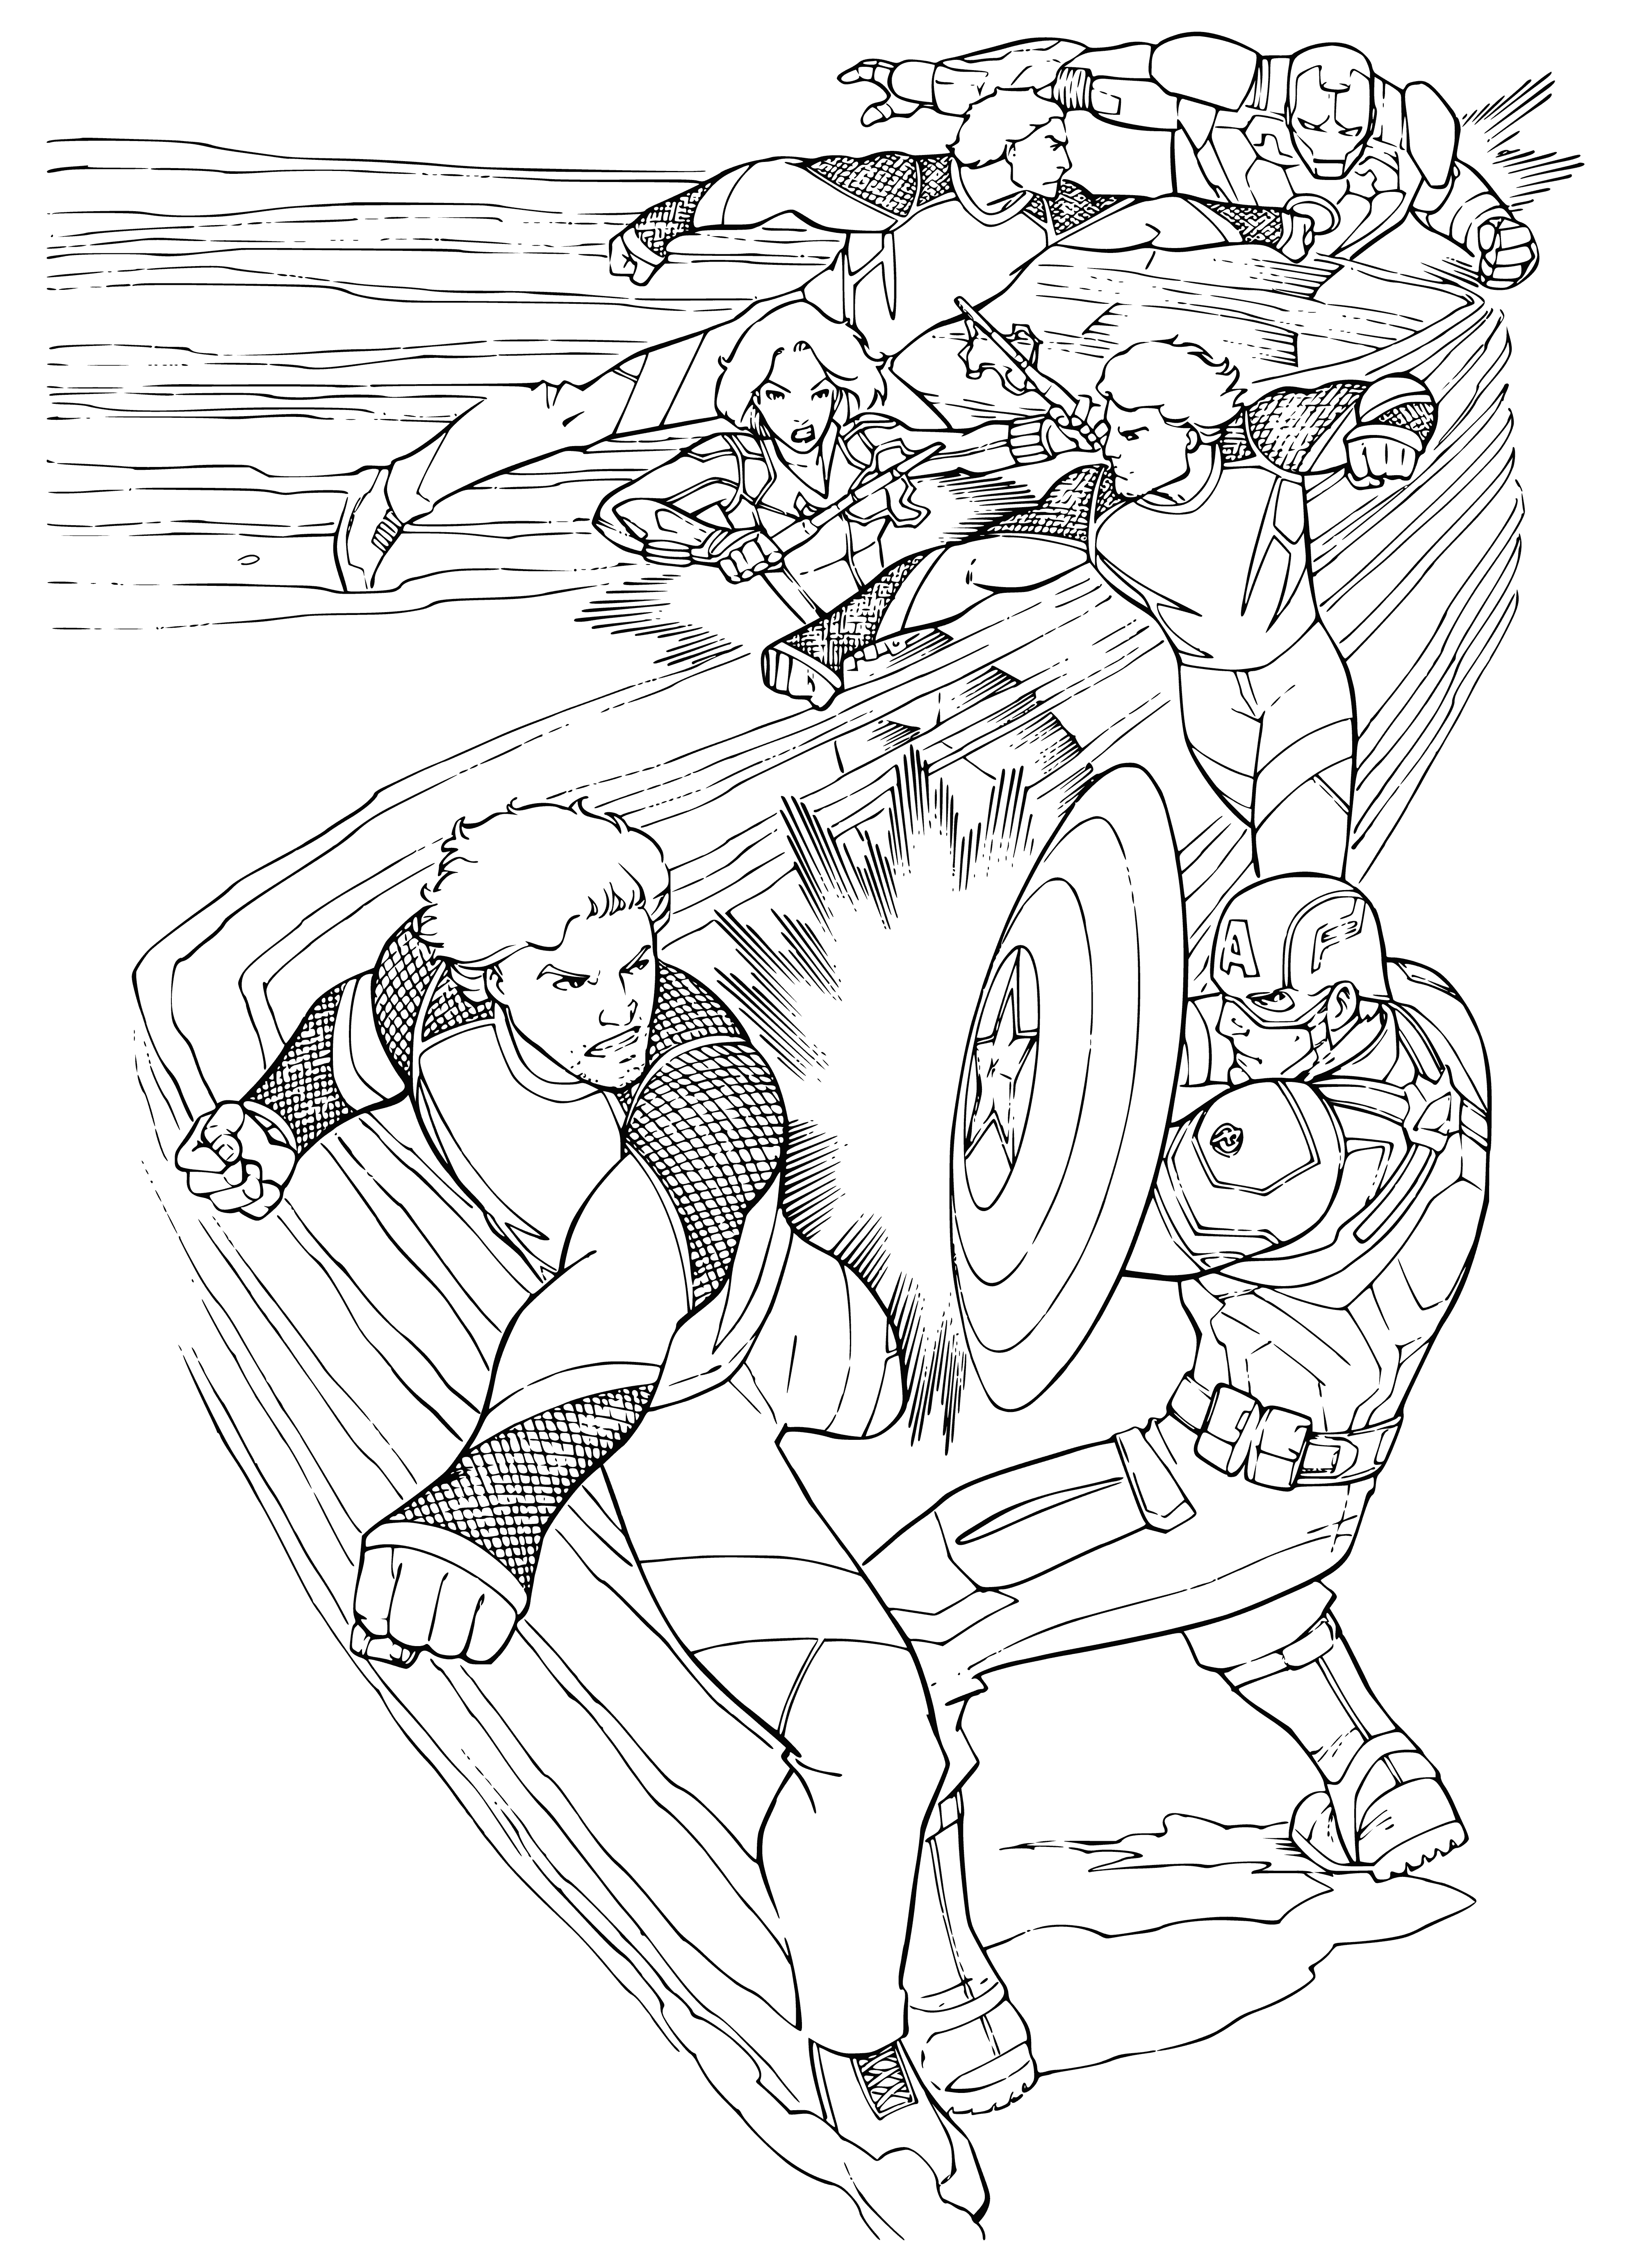 coloring page: 5 people in suits, 4 arms crossed, 1 extended; light surface & cityscape in background.